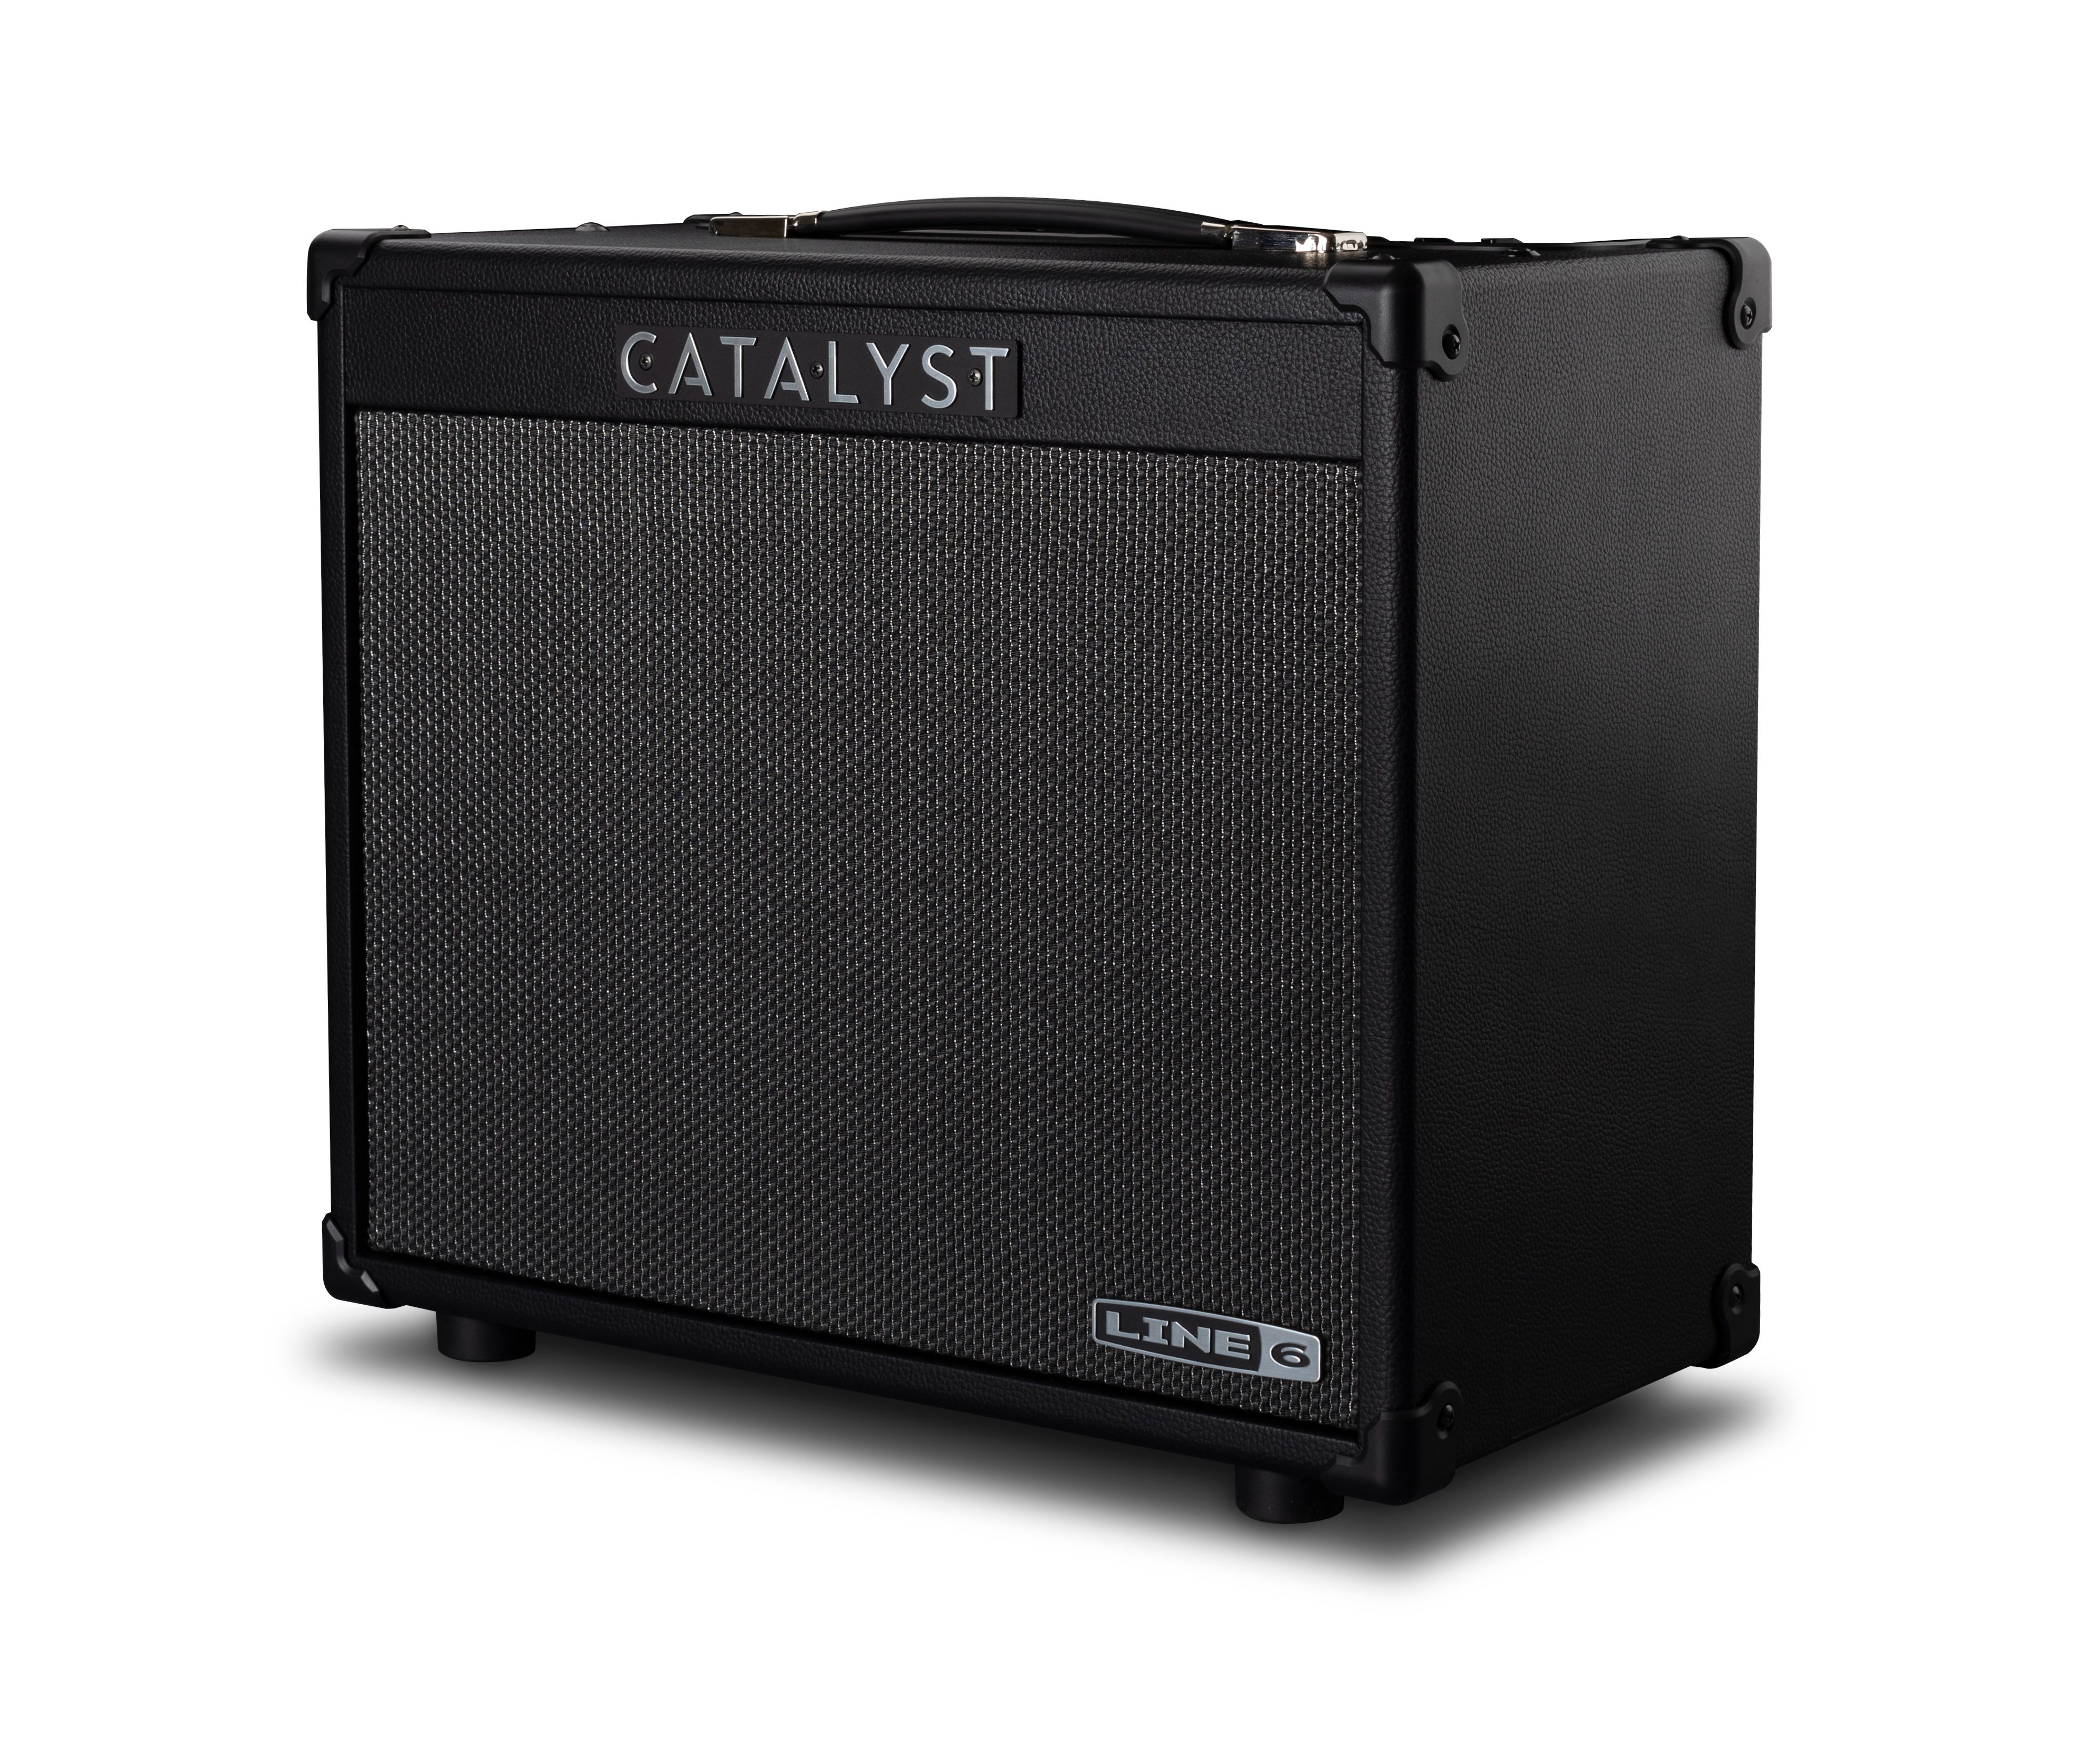 Line 6 Catalyst Combo 60w 1x12 - Electric guitar combo amp - Variation 3